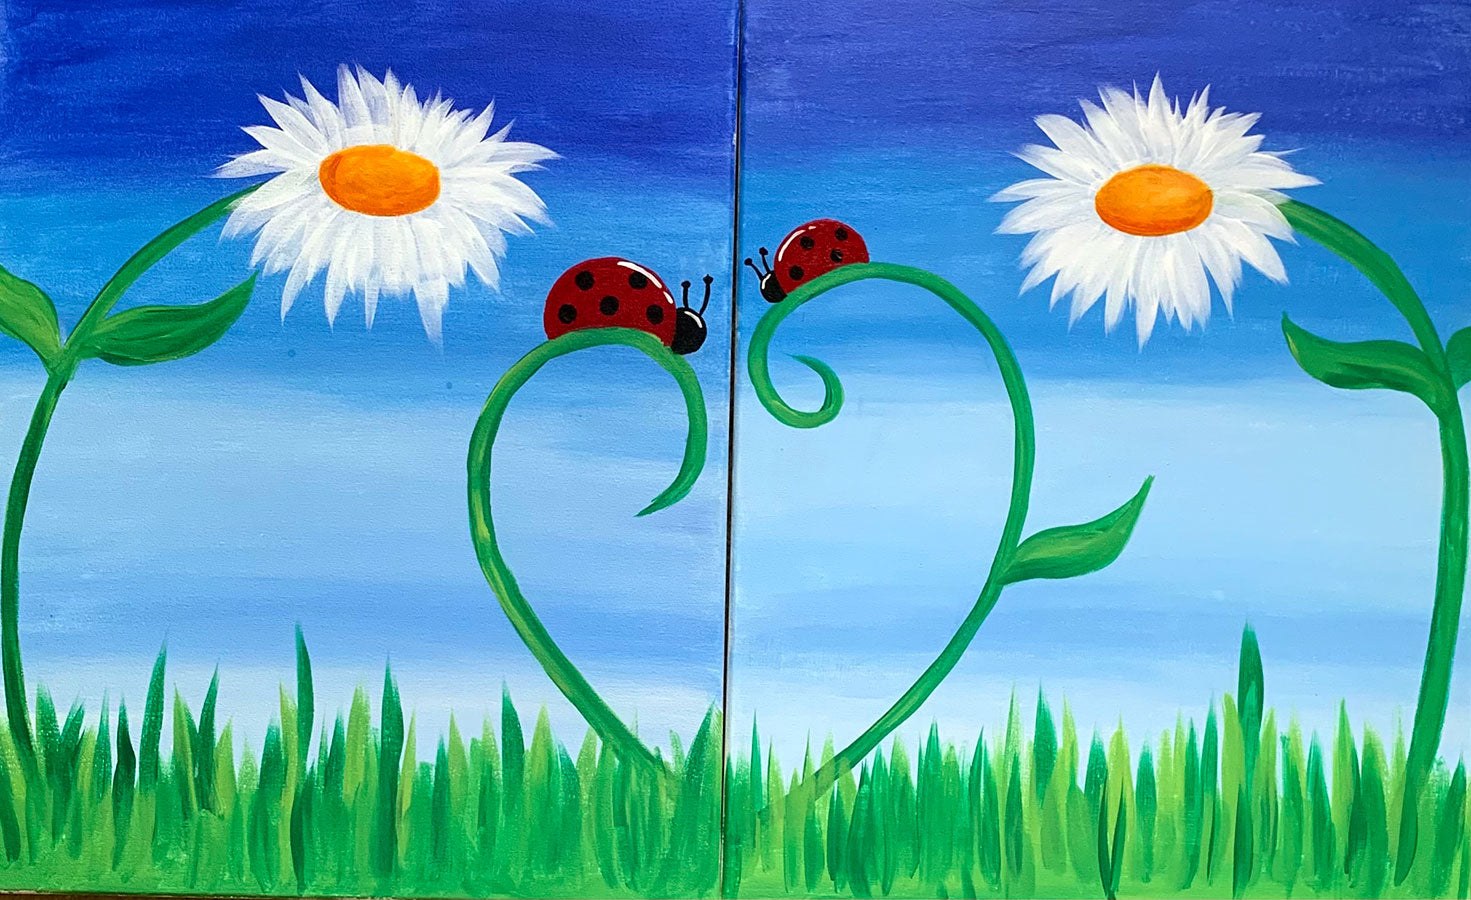 Night out for Mother's Day, Painting with a Twist